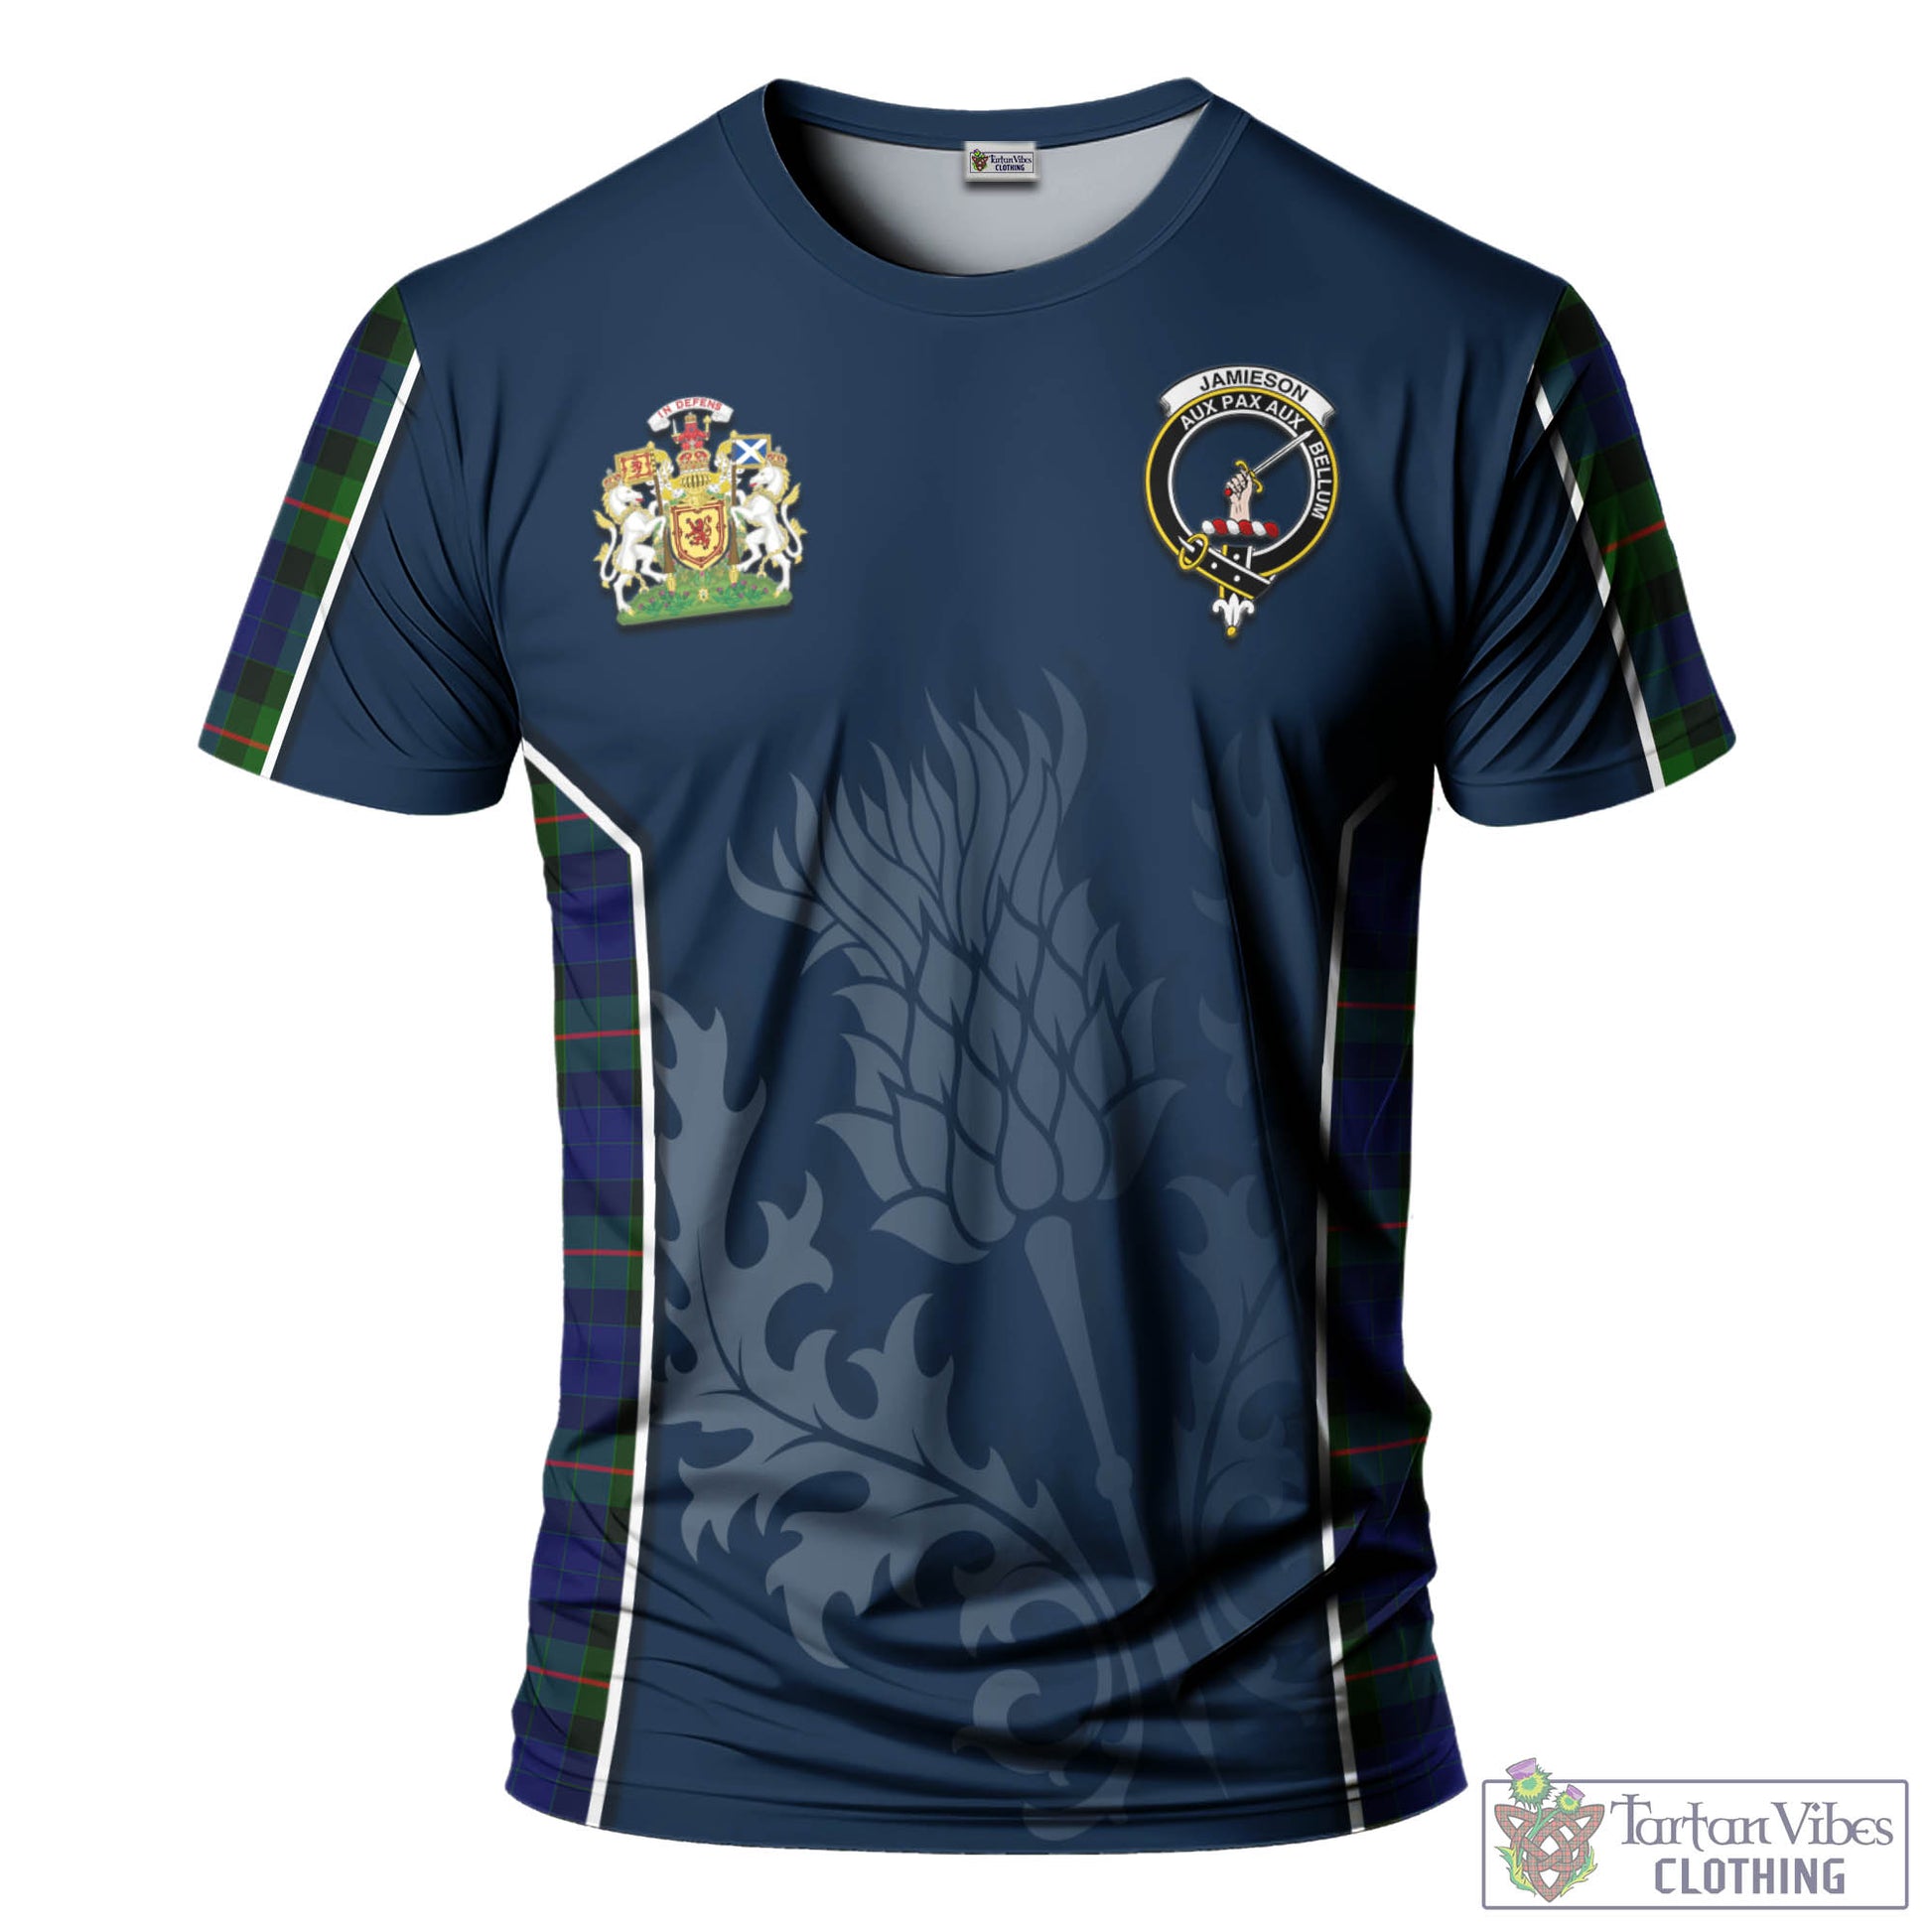 Tartan Vibes Clothing Jamieson Tartan T-Shirt with Family Crest and Scottish Thistle Vibes Sport Style